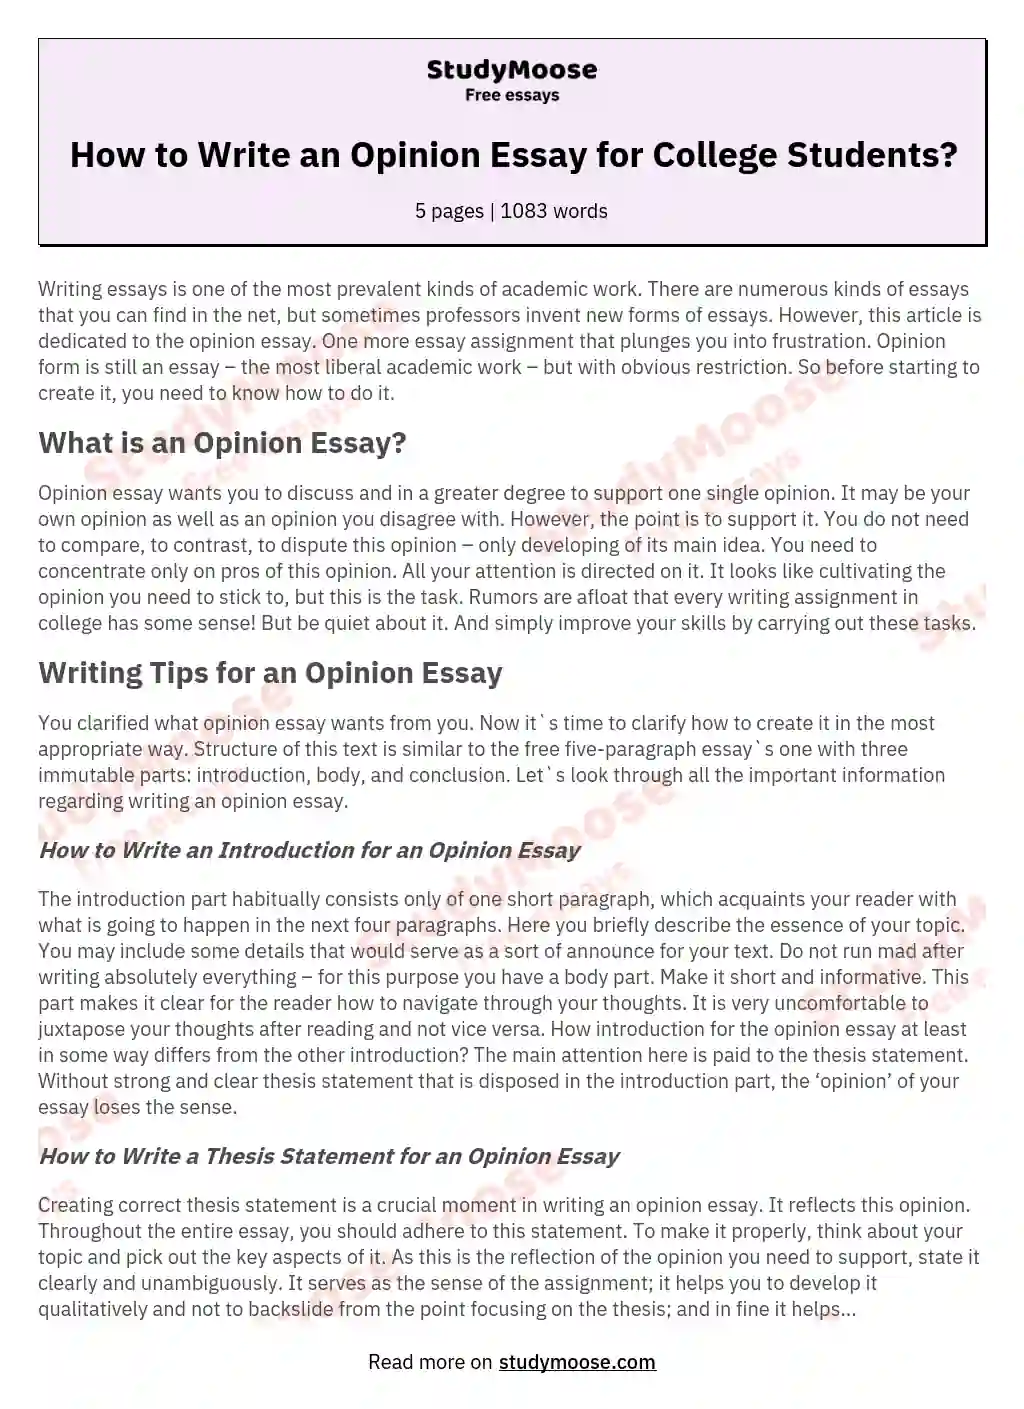 How to Write an Opinion Essay for College Students?